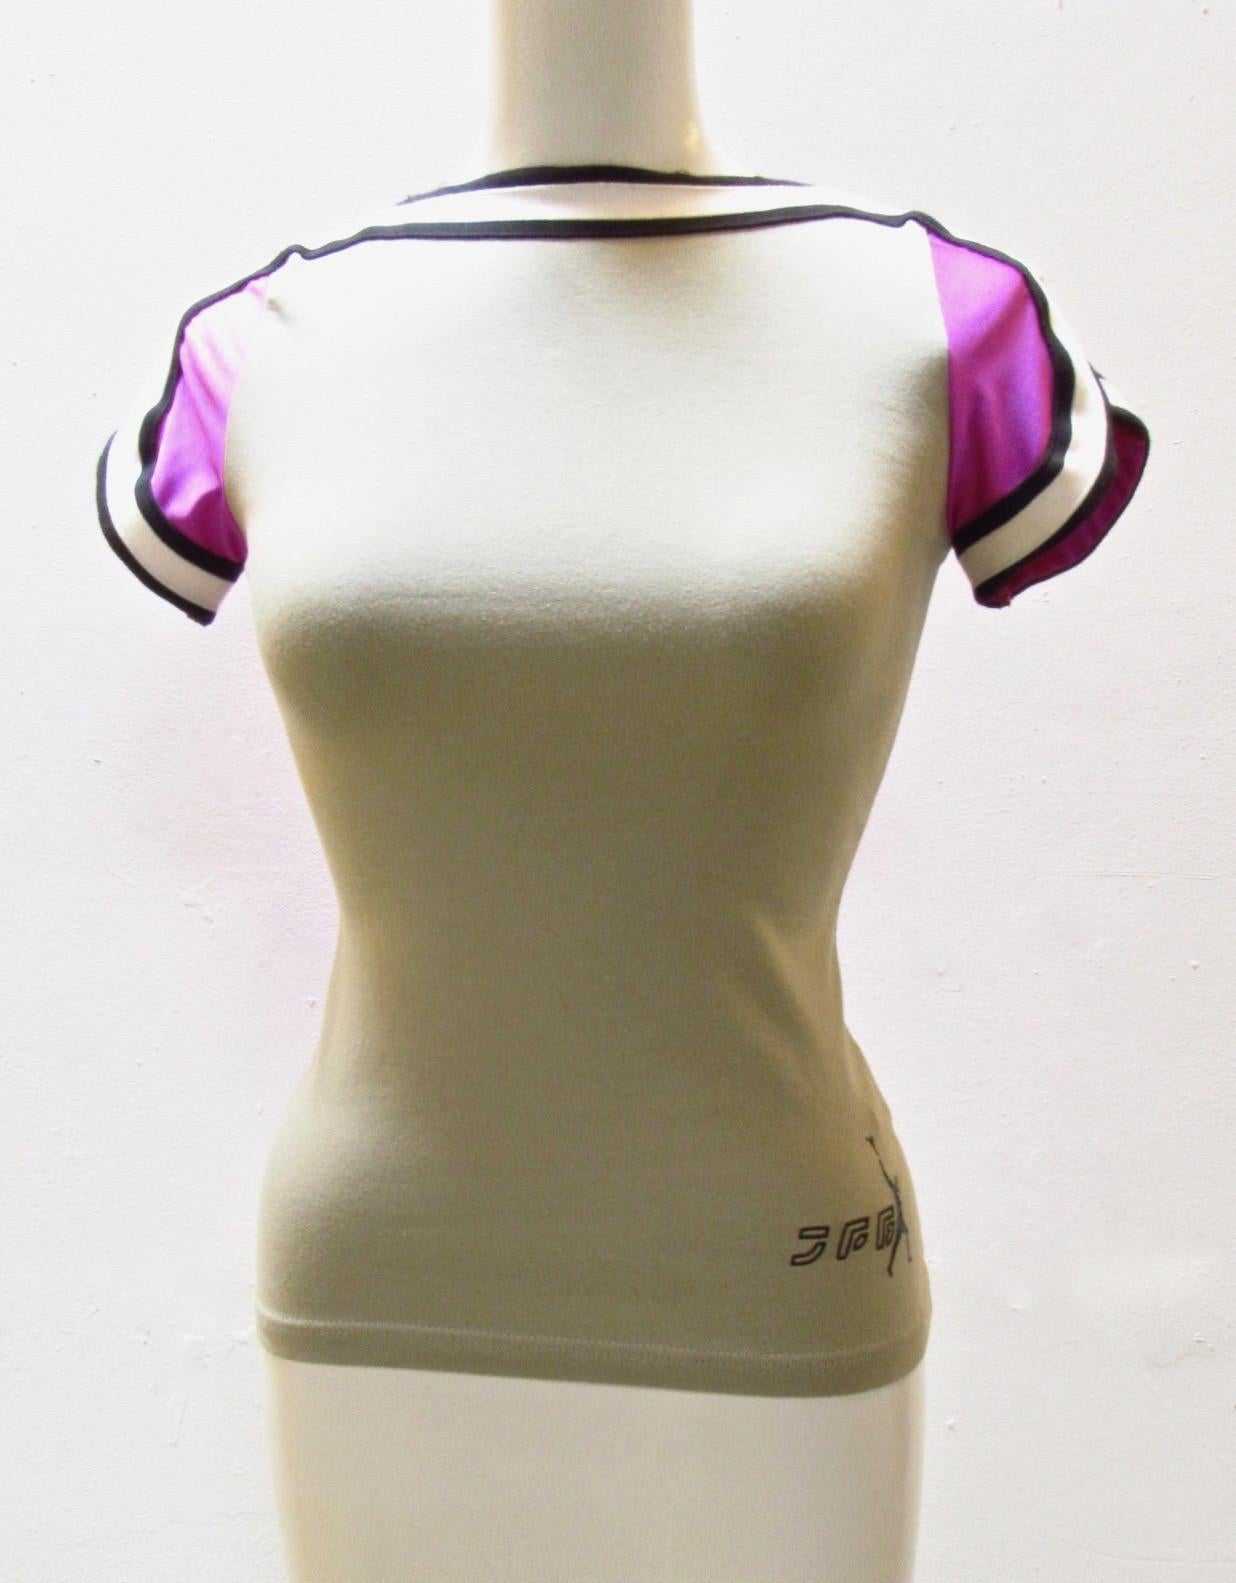 This fitted tee from vintage Jean Paul Gaultier Sport is a subtle grey in front and vibrant purple in back and features contrasting black and white collar and cuffs. The JPG Sport logo appears on the bottom left side. 